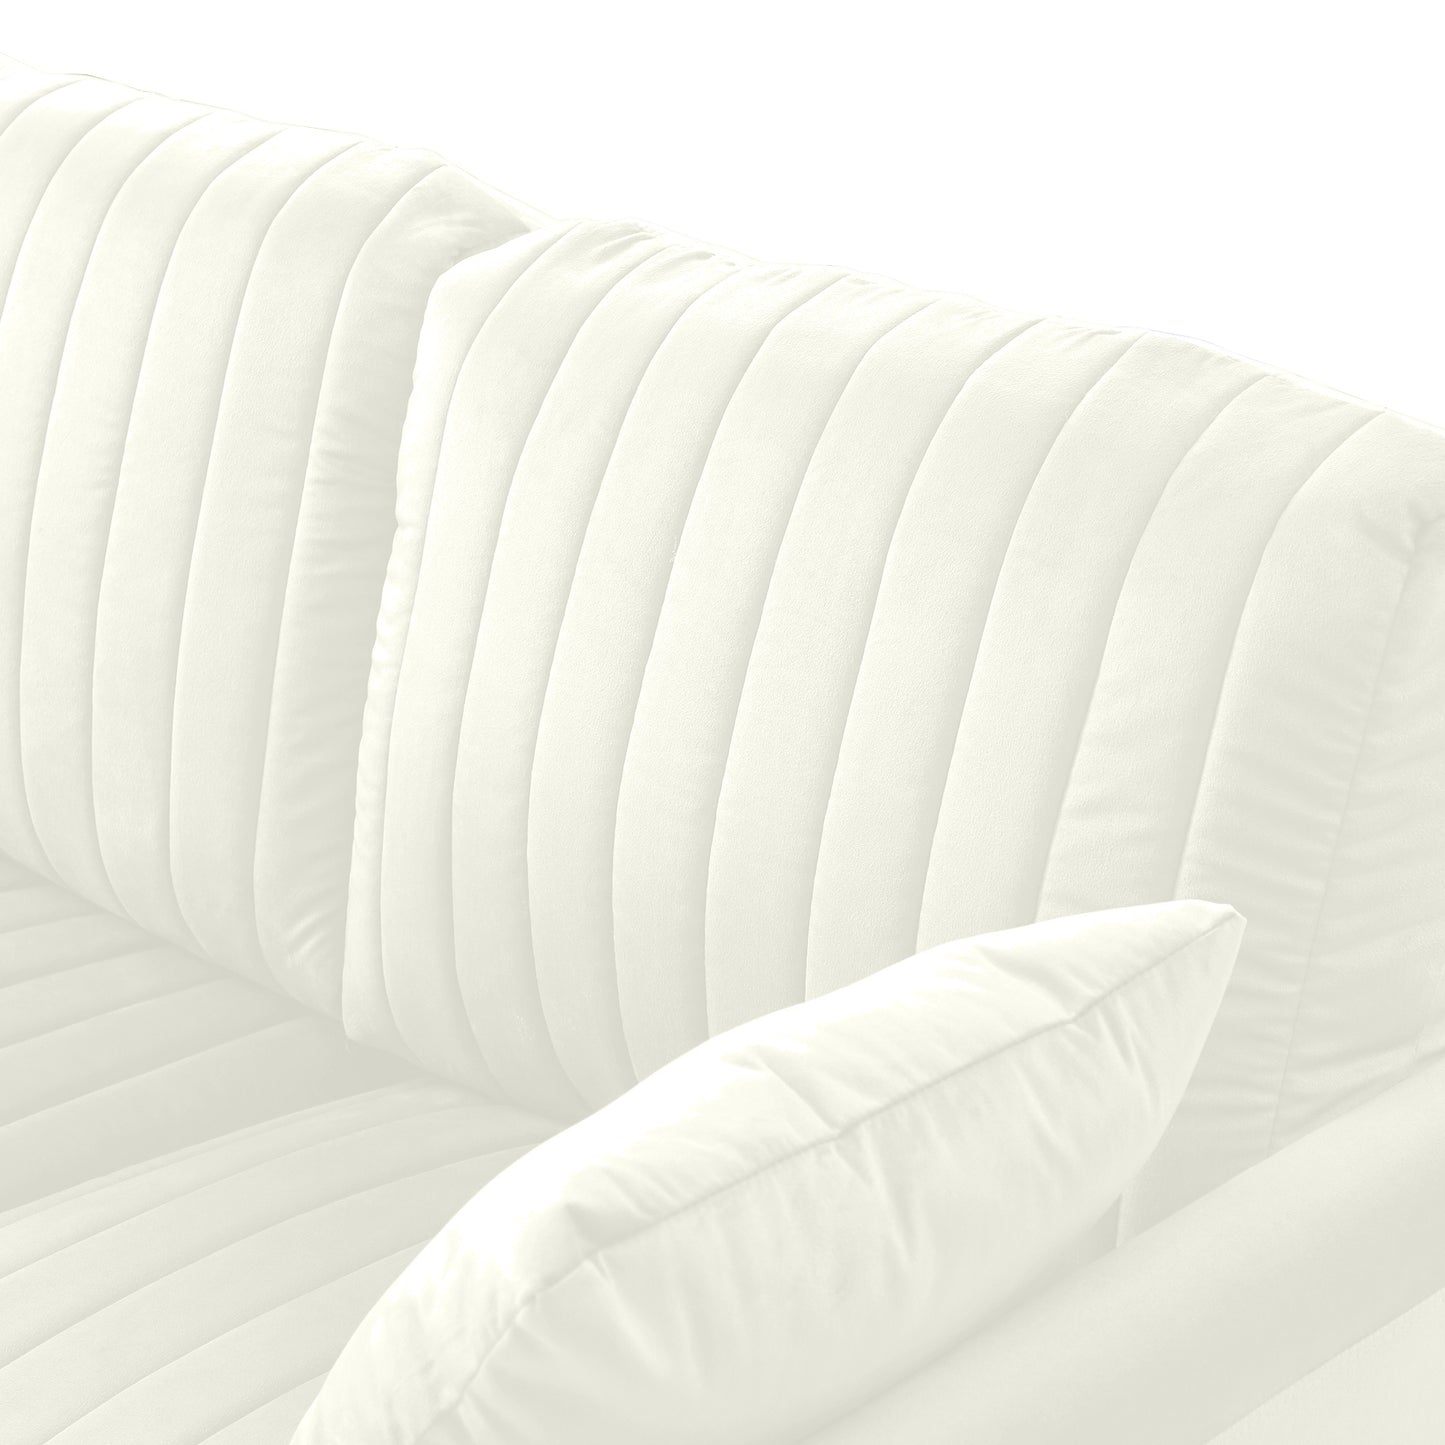 Cream White 2 Seater Loveseat Sofa Couch w/Pillows and Metal Legs, Upholstered Modern Love Seats Furniture for Bedroom, Office, Small Space, Apartment